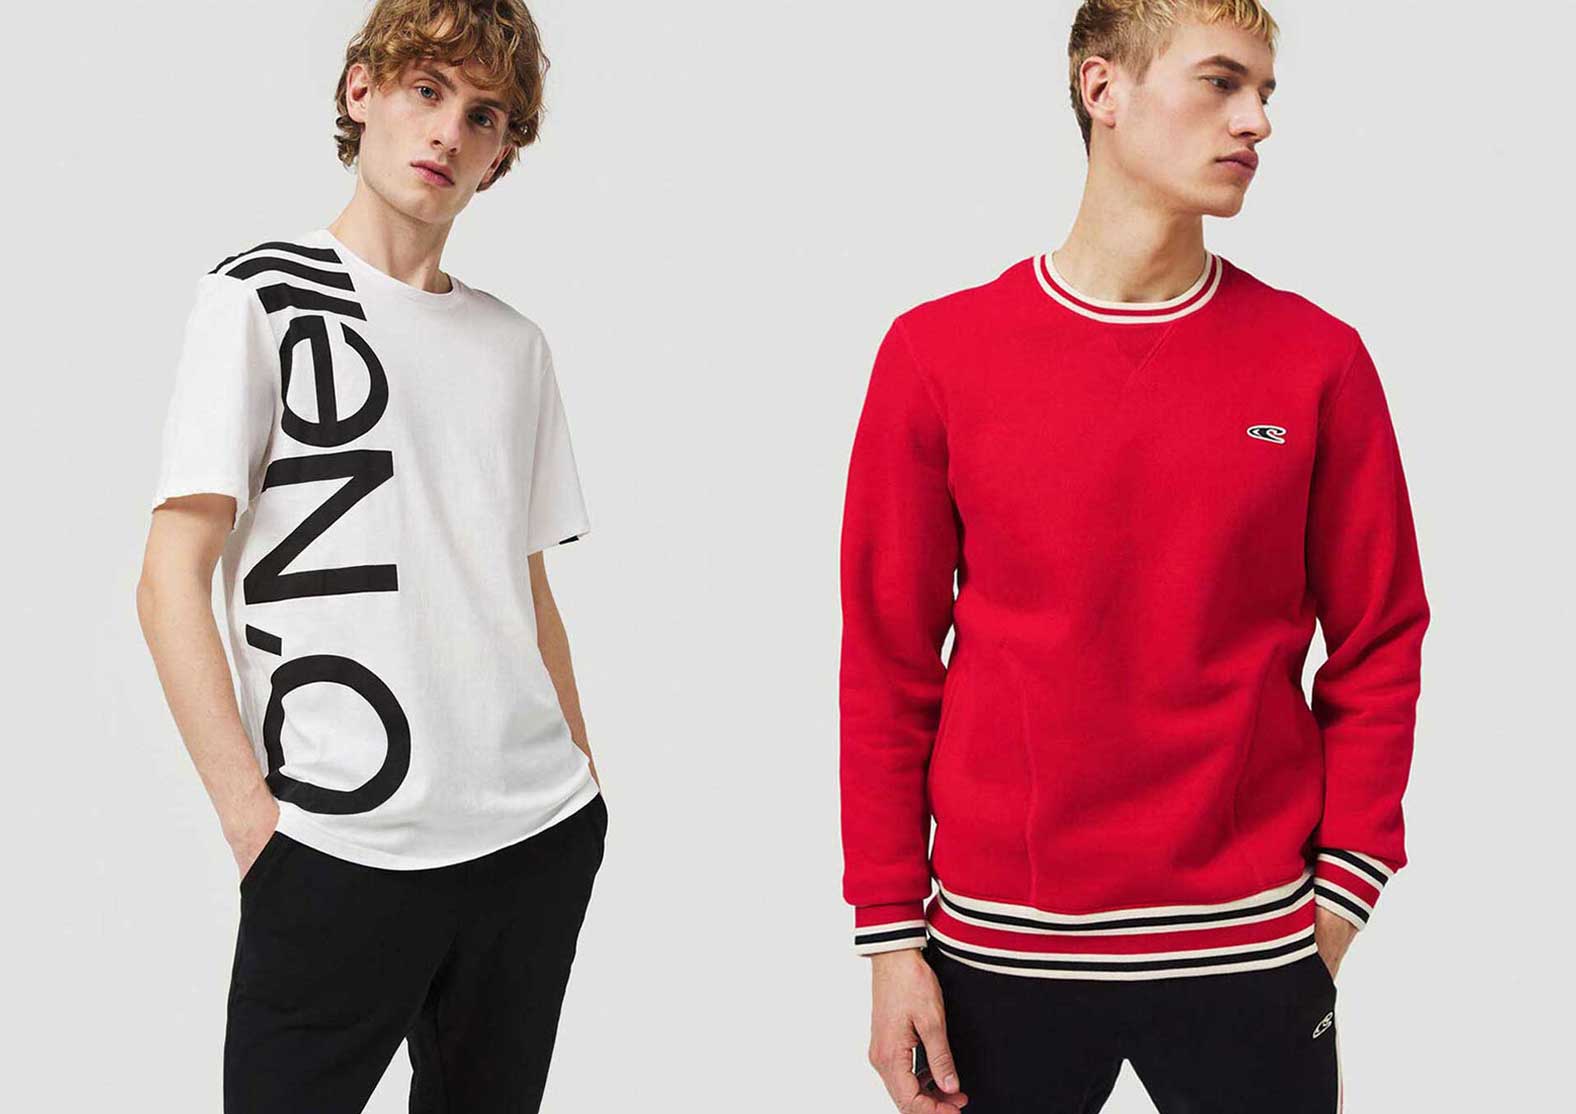 The man left wearing a white T-Shirt with a bold O'Neill logo and the man left wearing a red sweatshirt with striped cuffs and waistband